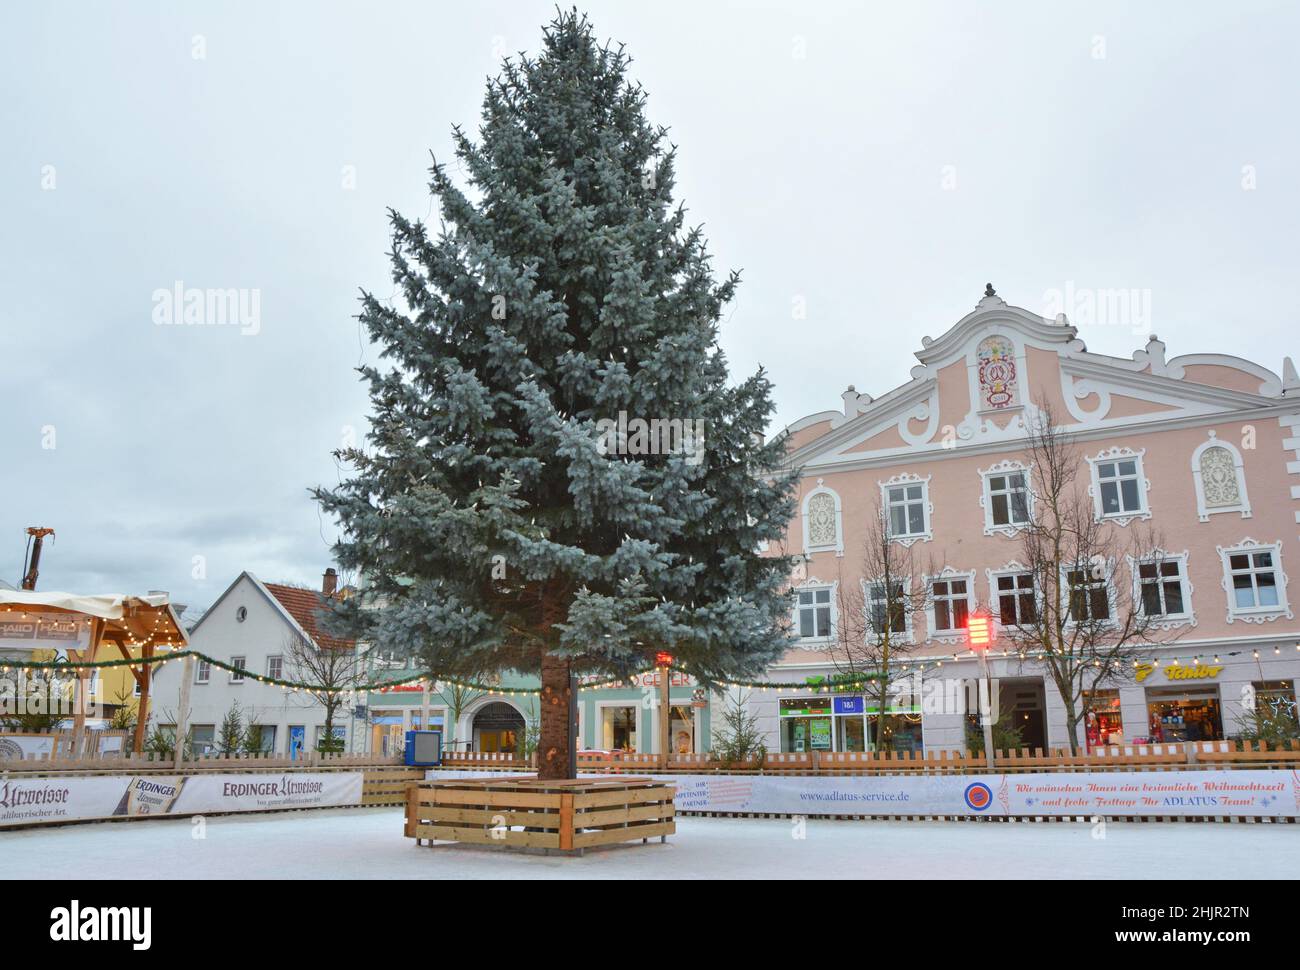 Erding, Germany - November 28, 2017: Ice rink and Christmas tree at Christmas market in Erding town in Germany. Stock Photo